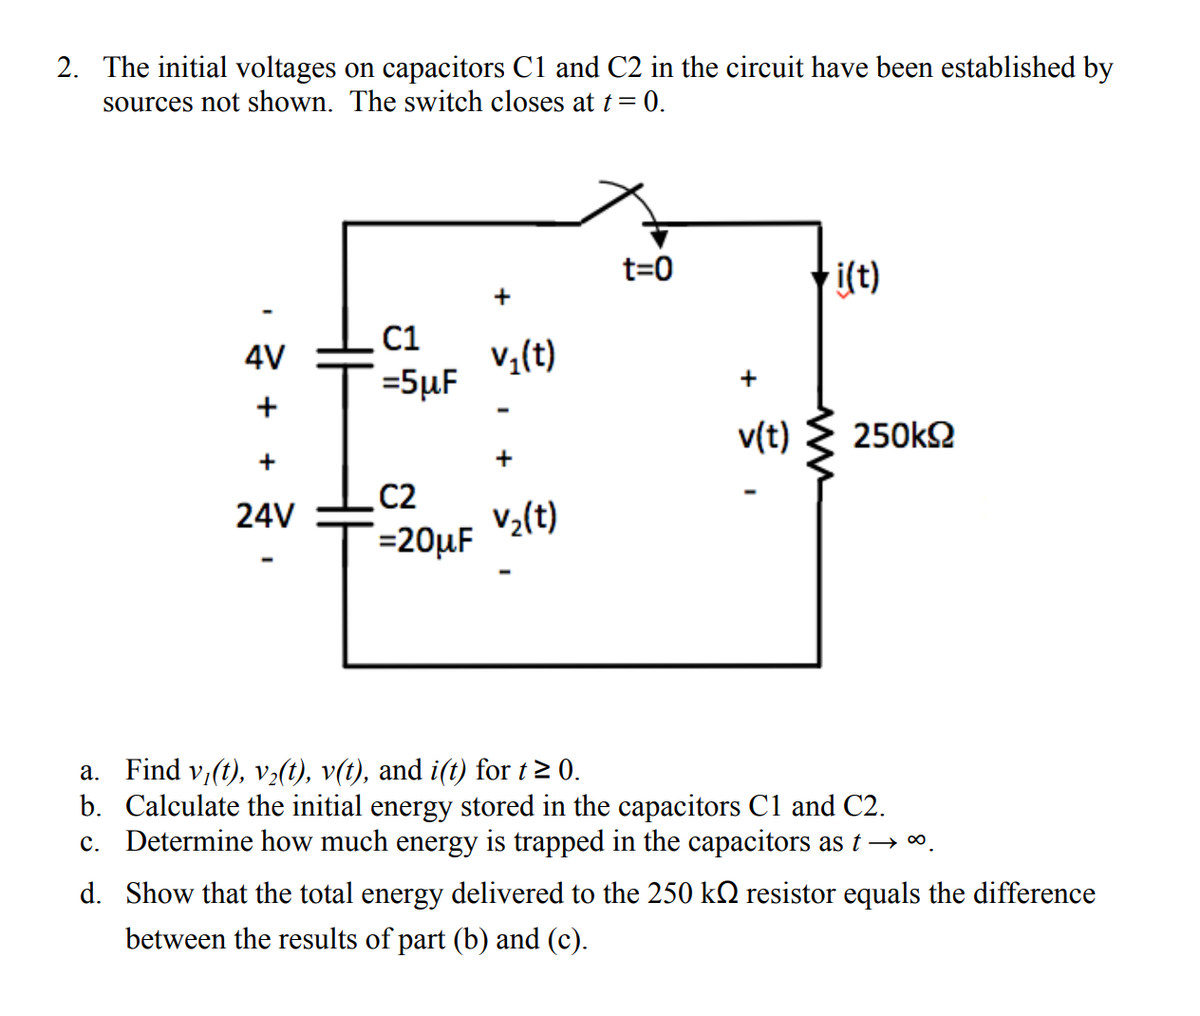 2. The initial voltages on capacitors C1 and C2 in the circuit have been established by
sources not shown. The switch closes at t = 0.
t=0
i(t)
C1
4V
v₂(t)
=5μF
C2
V₂(t)
=20μF
a. Find v₁(t), v₂(t), v(t), and i(t) for t≥ 0.
b.
Calculate the initial energy stored in the capacitors C1 and C2.
c. Determine how much energy is trapped in the capacitors as t →∞.
d. Show that the total energy delivered to the 250 k№ resistor equals the difference
between the results of part (b) and (c).
+
+
24V
I
+
+
v(t)
www
I
250kS2